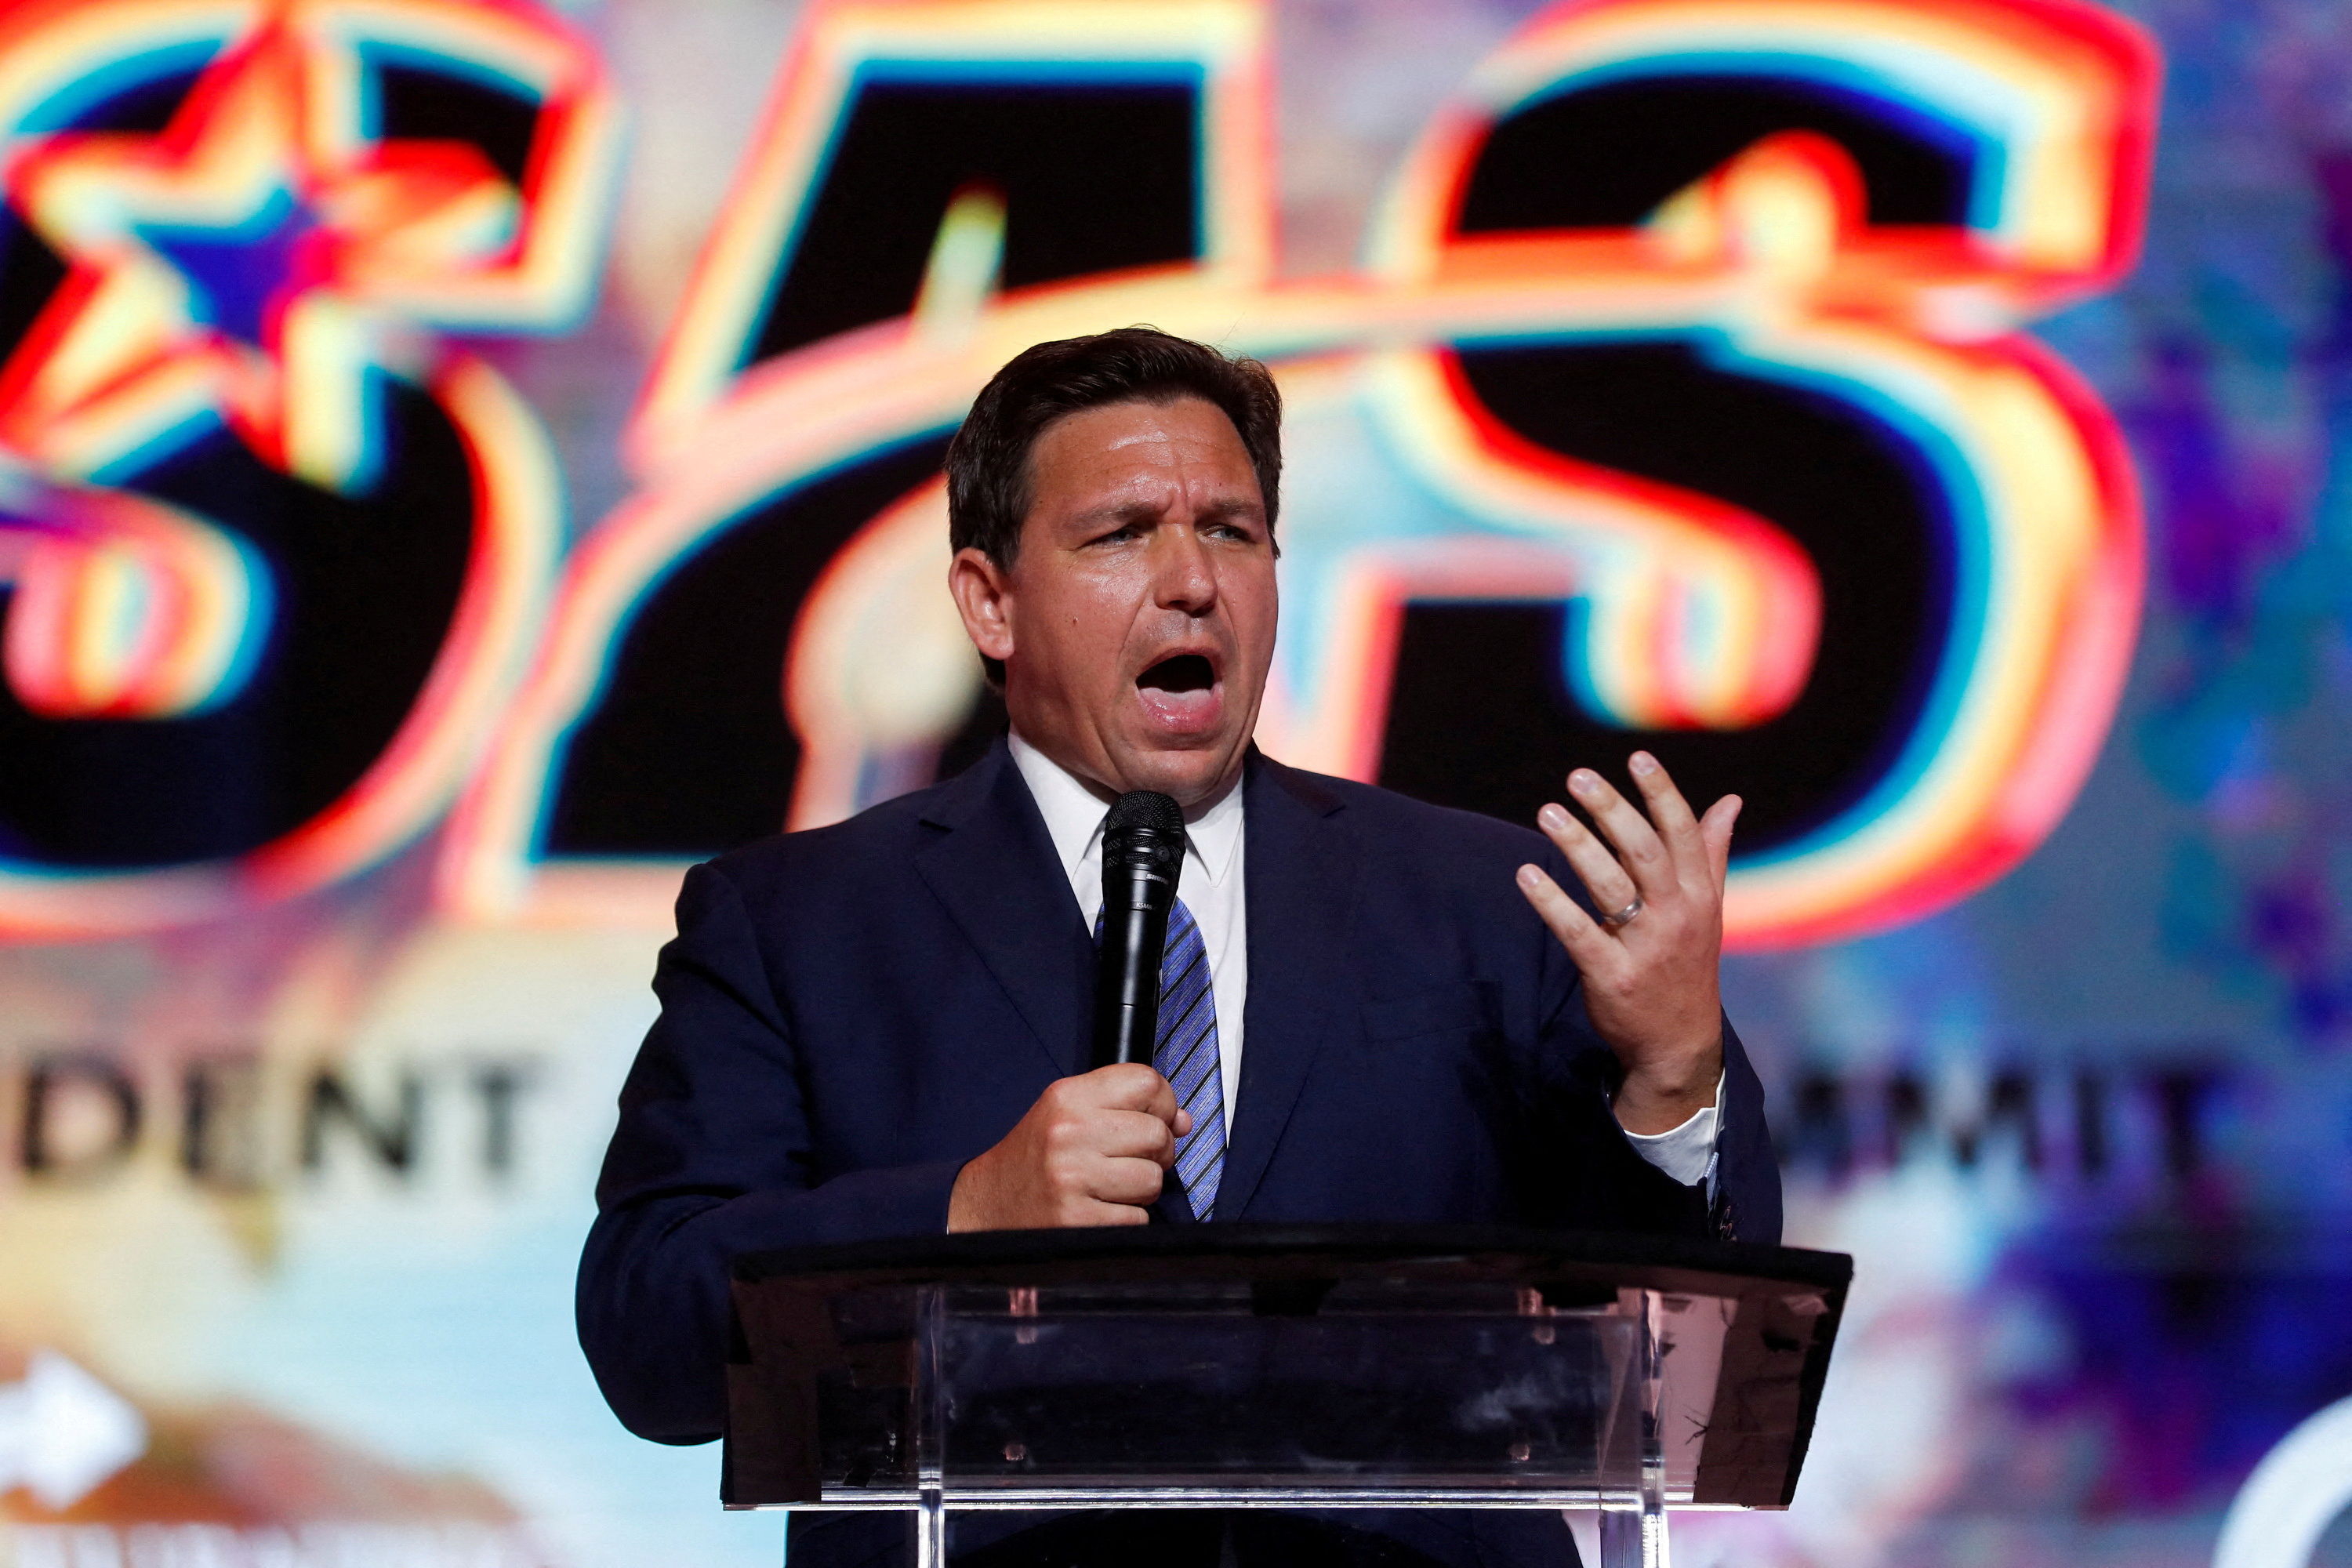 Governor Ron DeSantis has openly opposed this type of treatment for adolescents